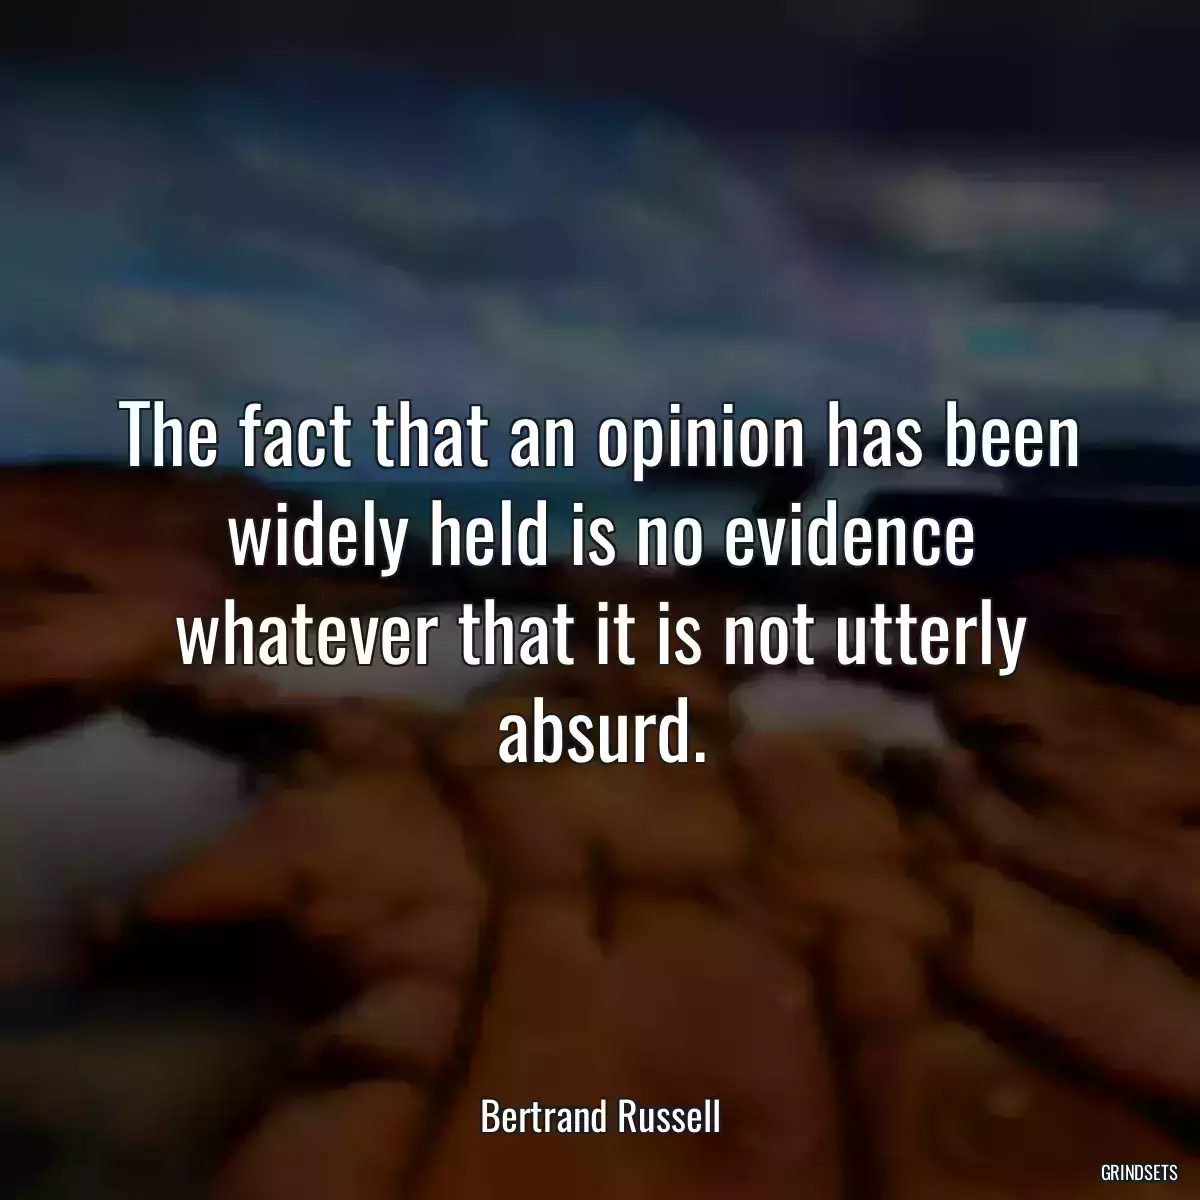 The fact that an opinion has been widely held is no evidence whatever that it is not utterly absurd.